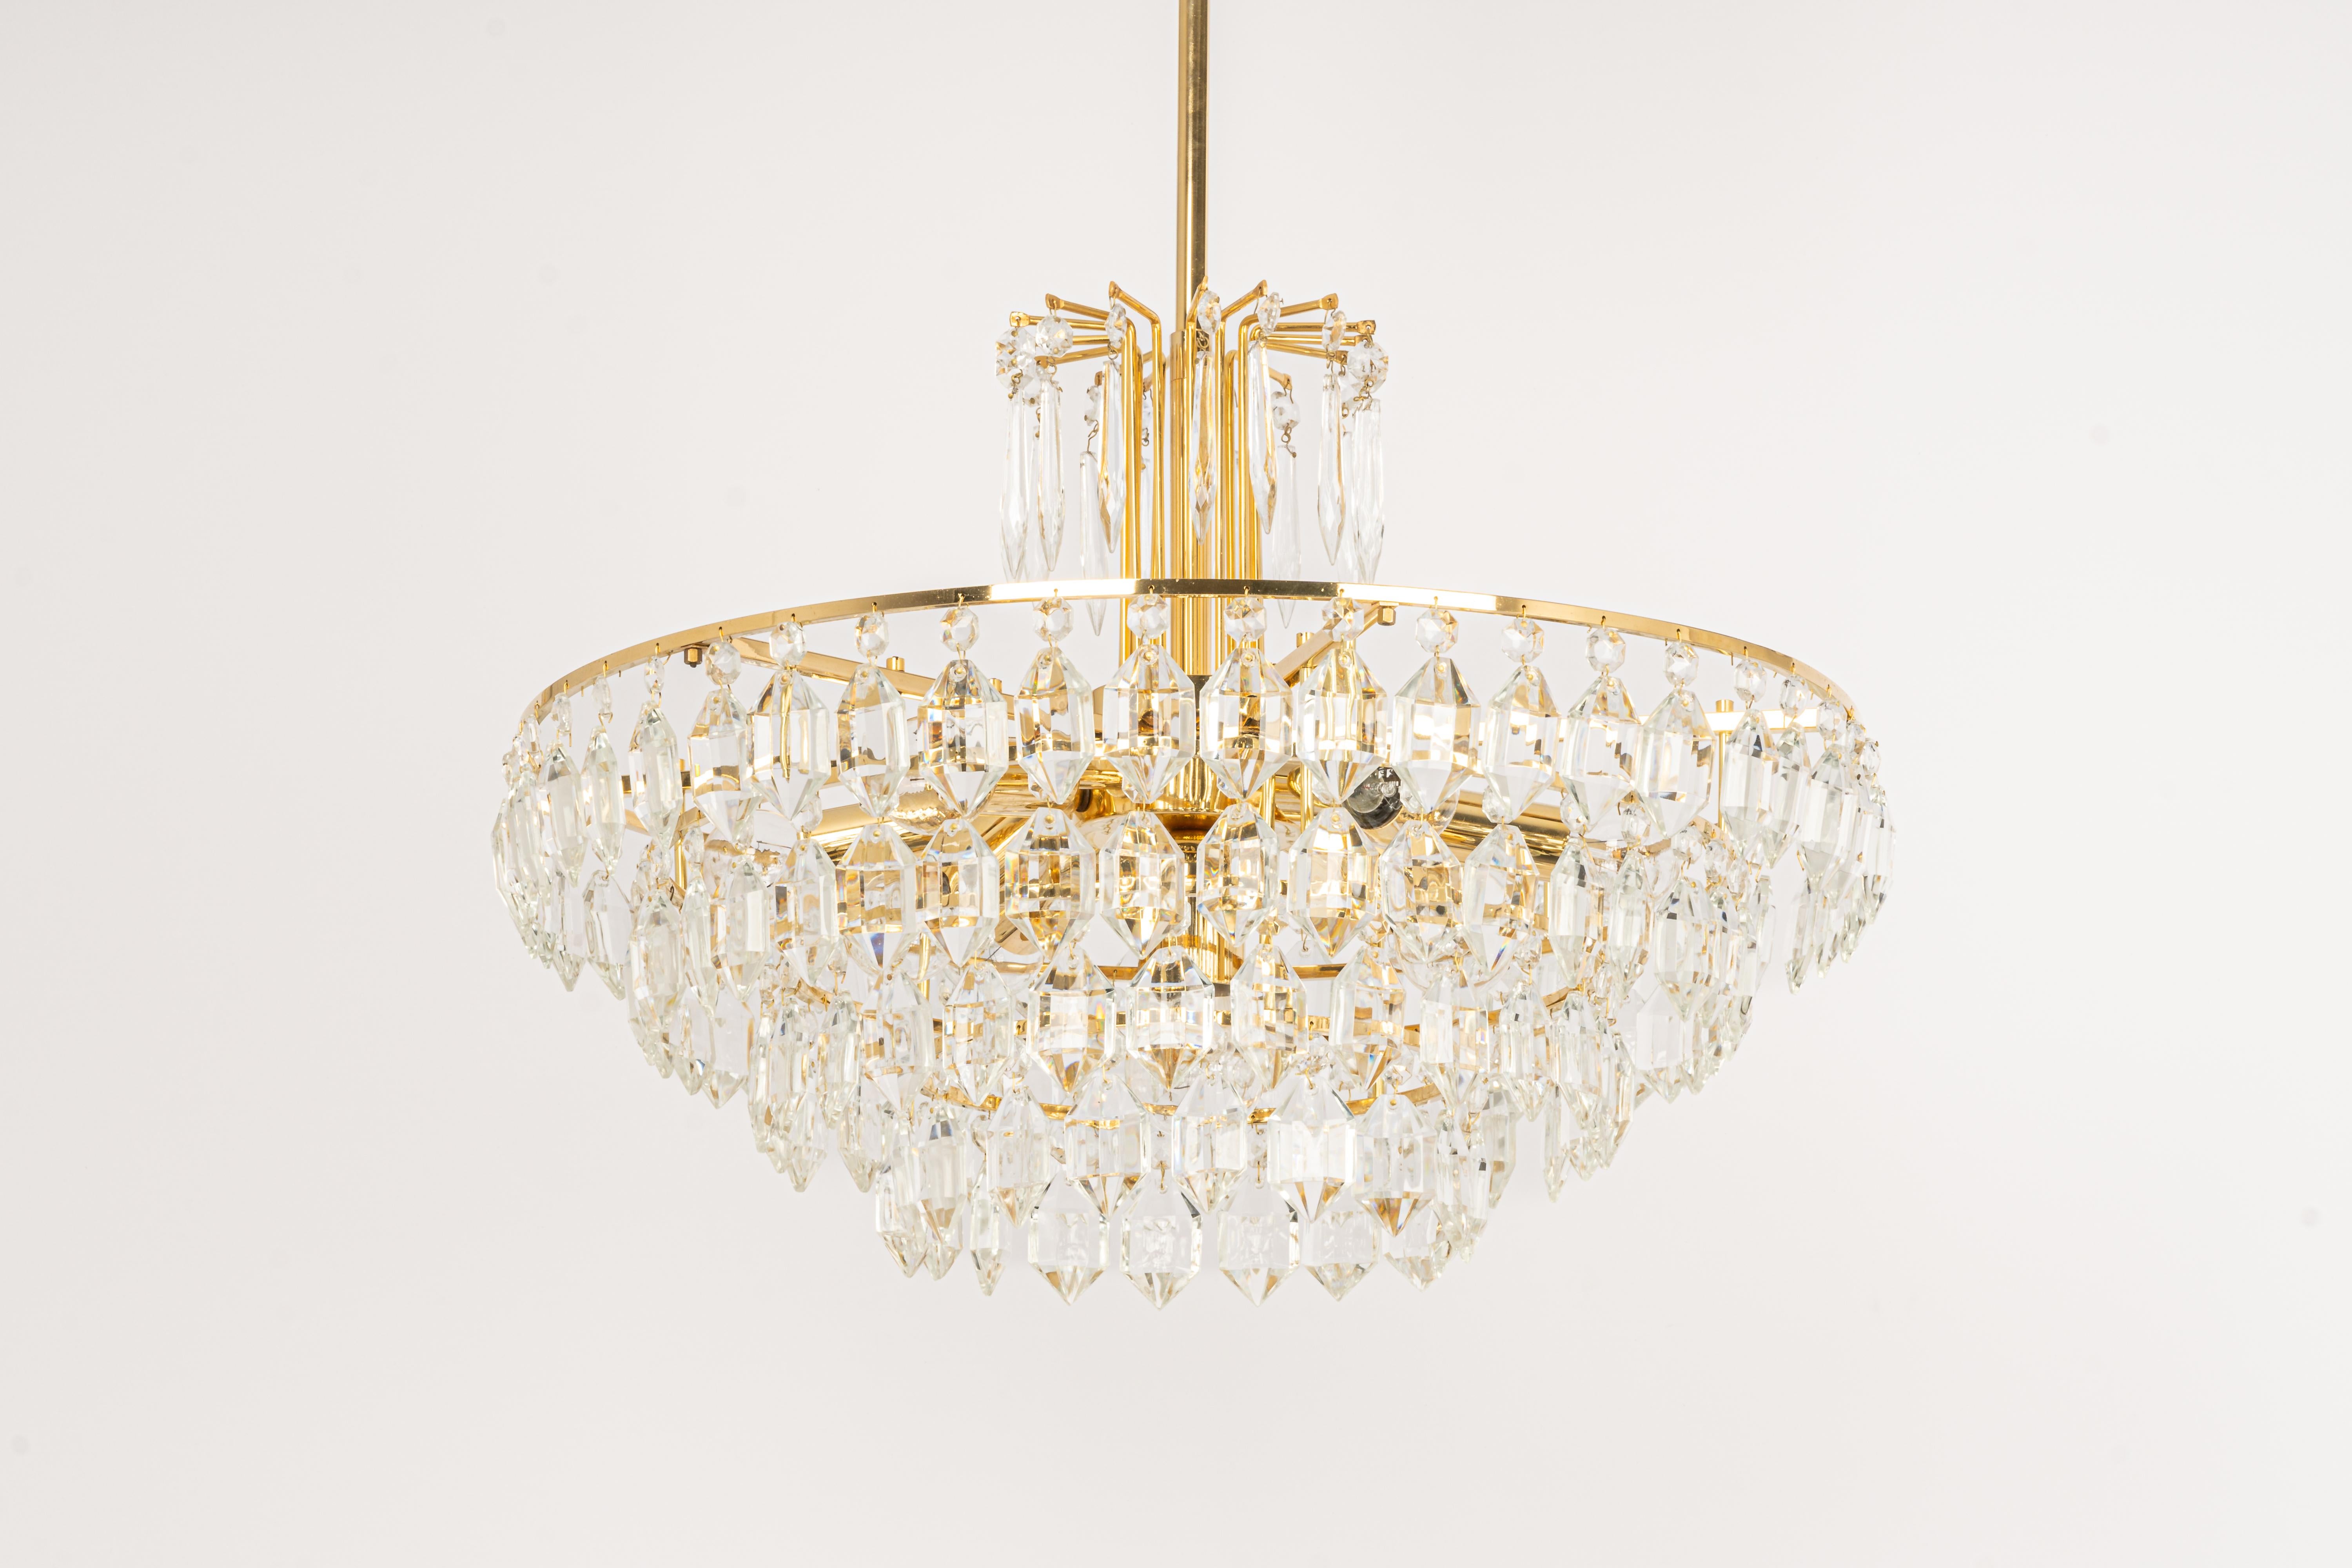 Mid-Century Modern 1 of 2 Bakalowits Chandelier, Brass and Crystal Glass, Austria, 1960s For Sale